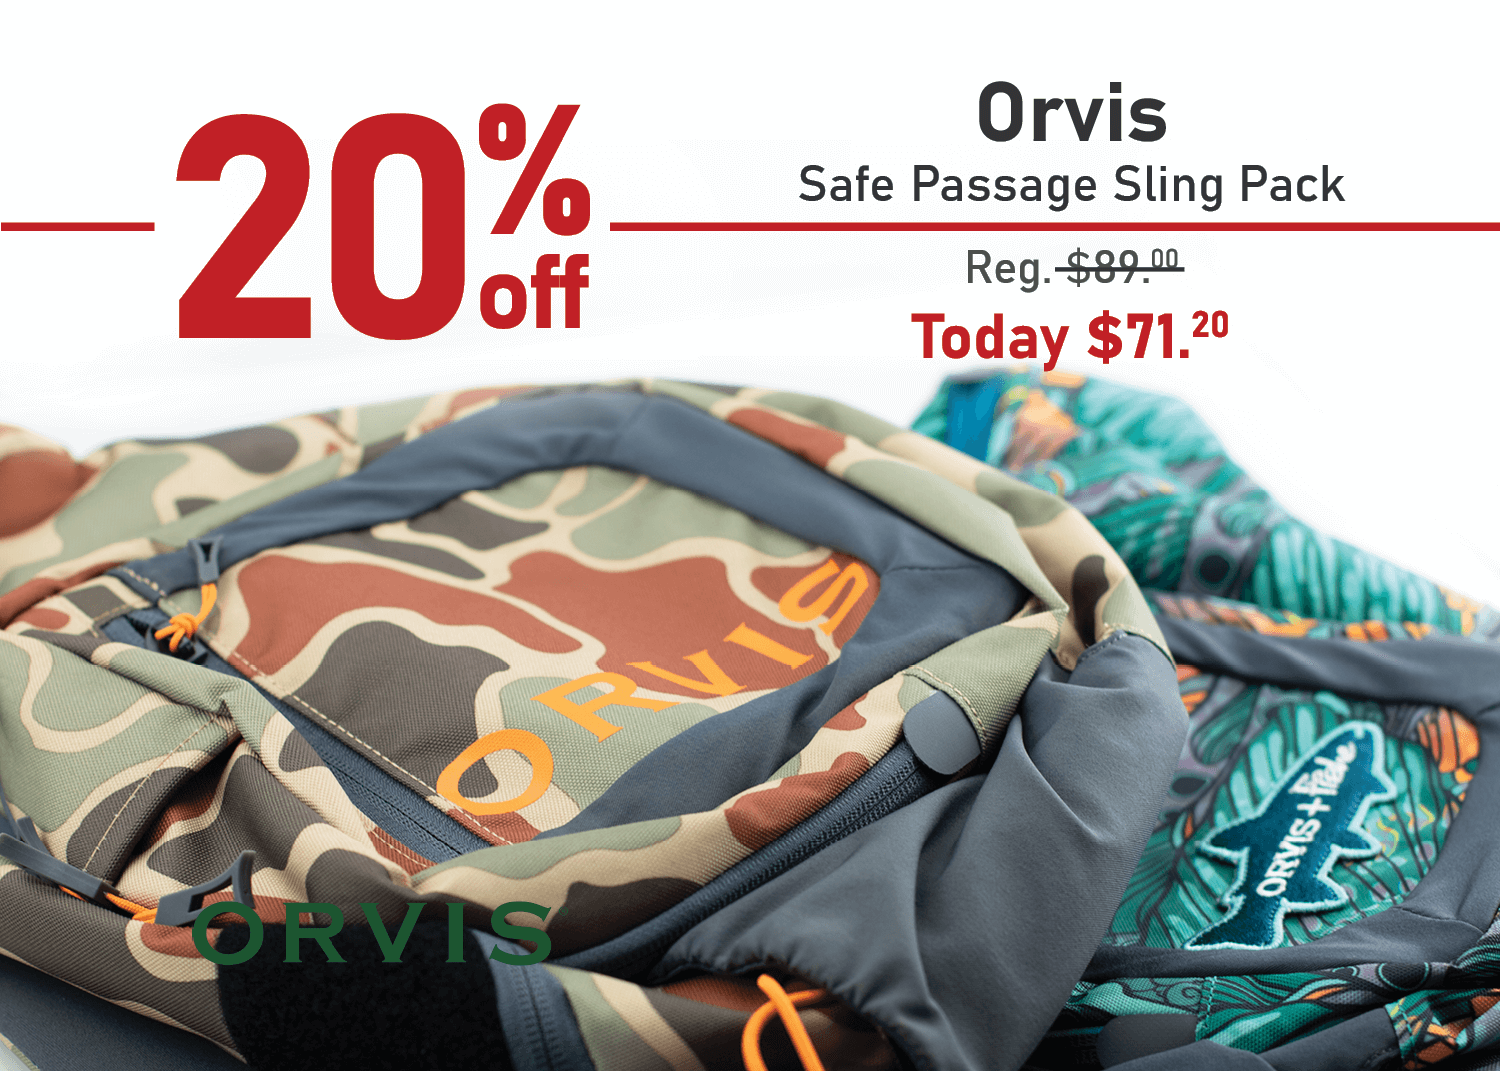 Save 20% on the Orvis Safe Passage Sling Pack 